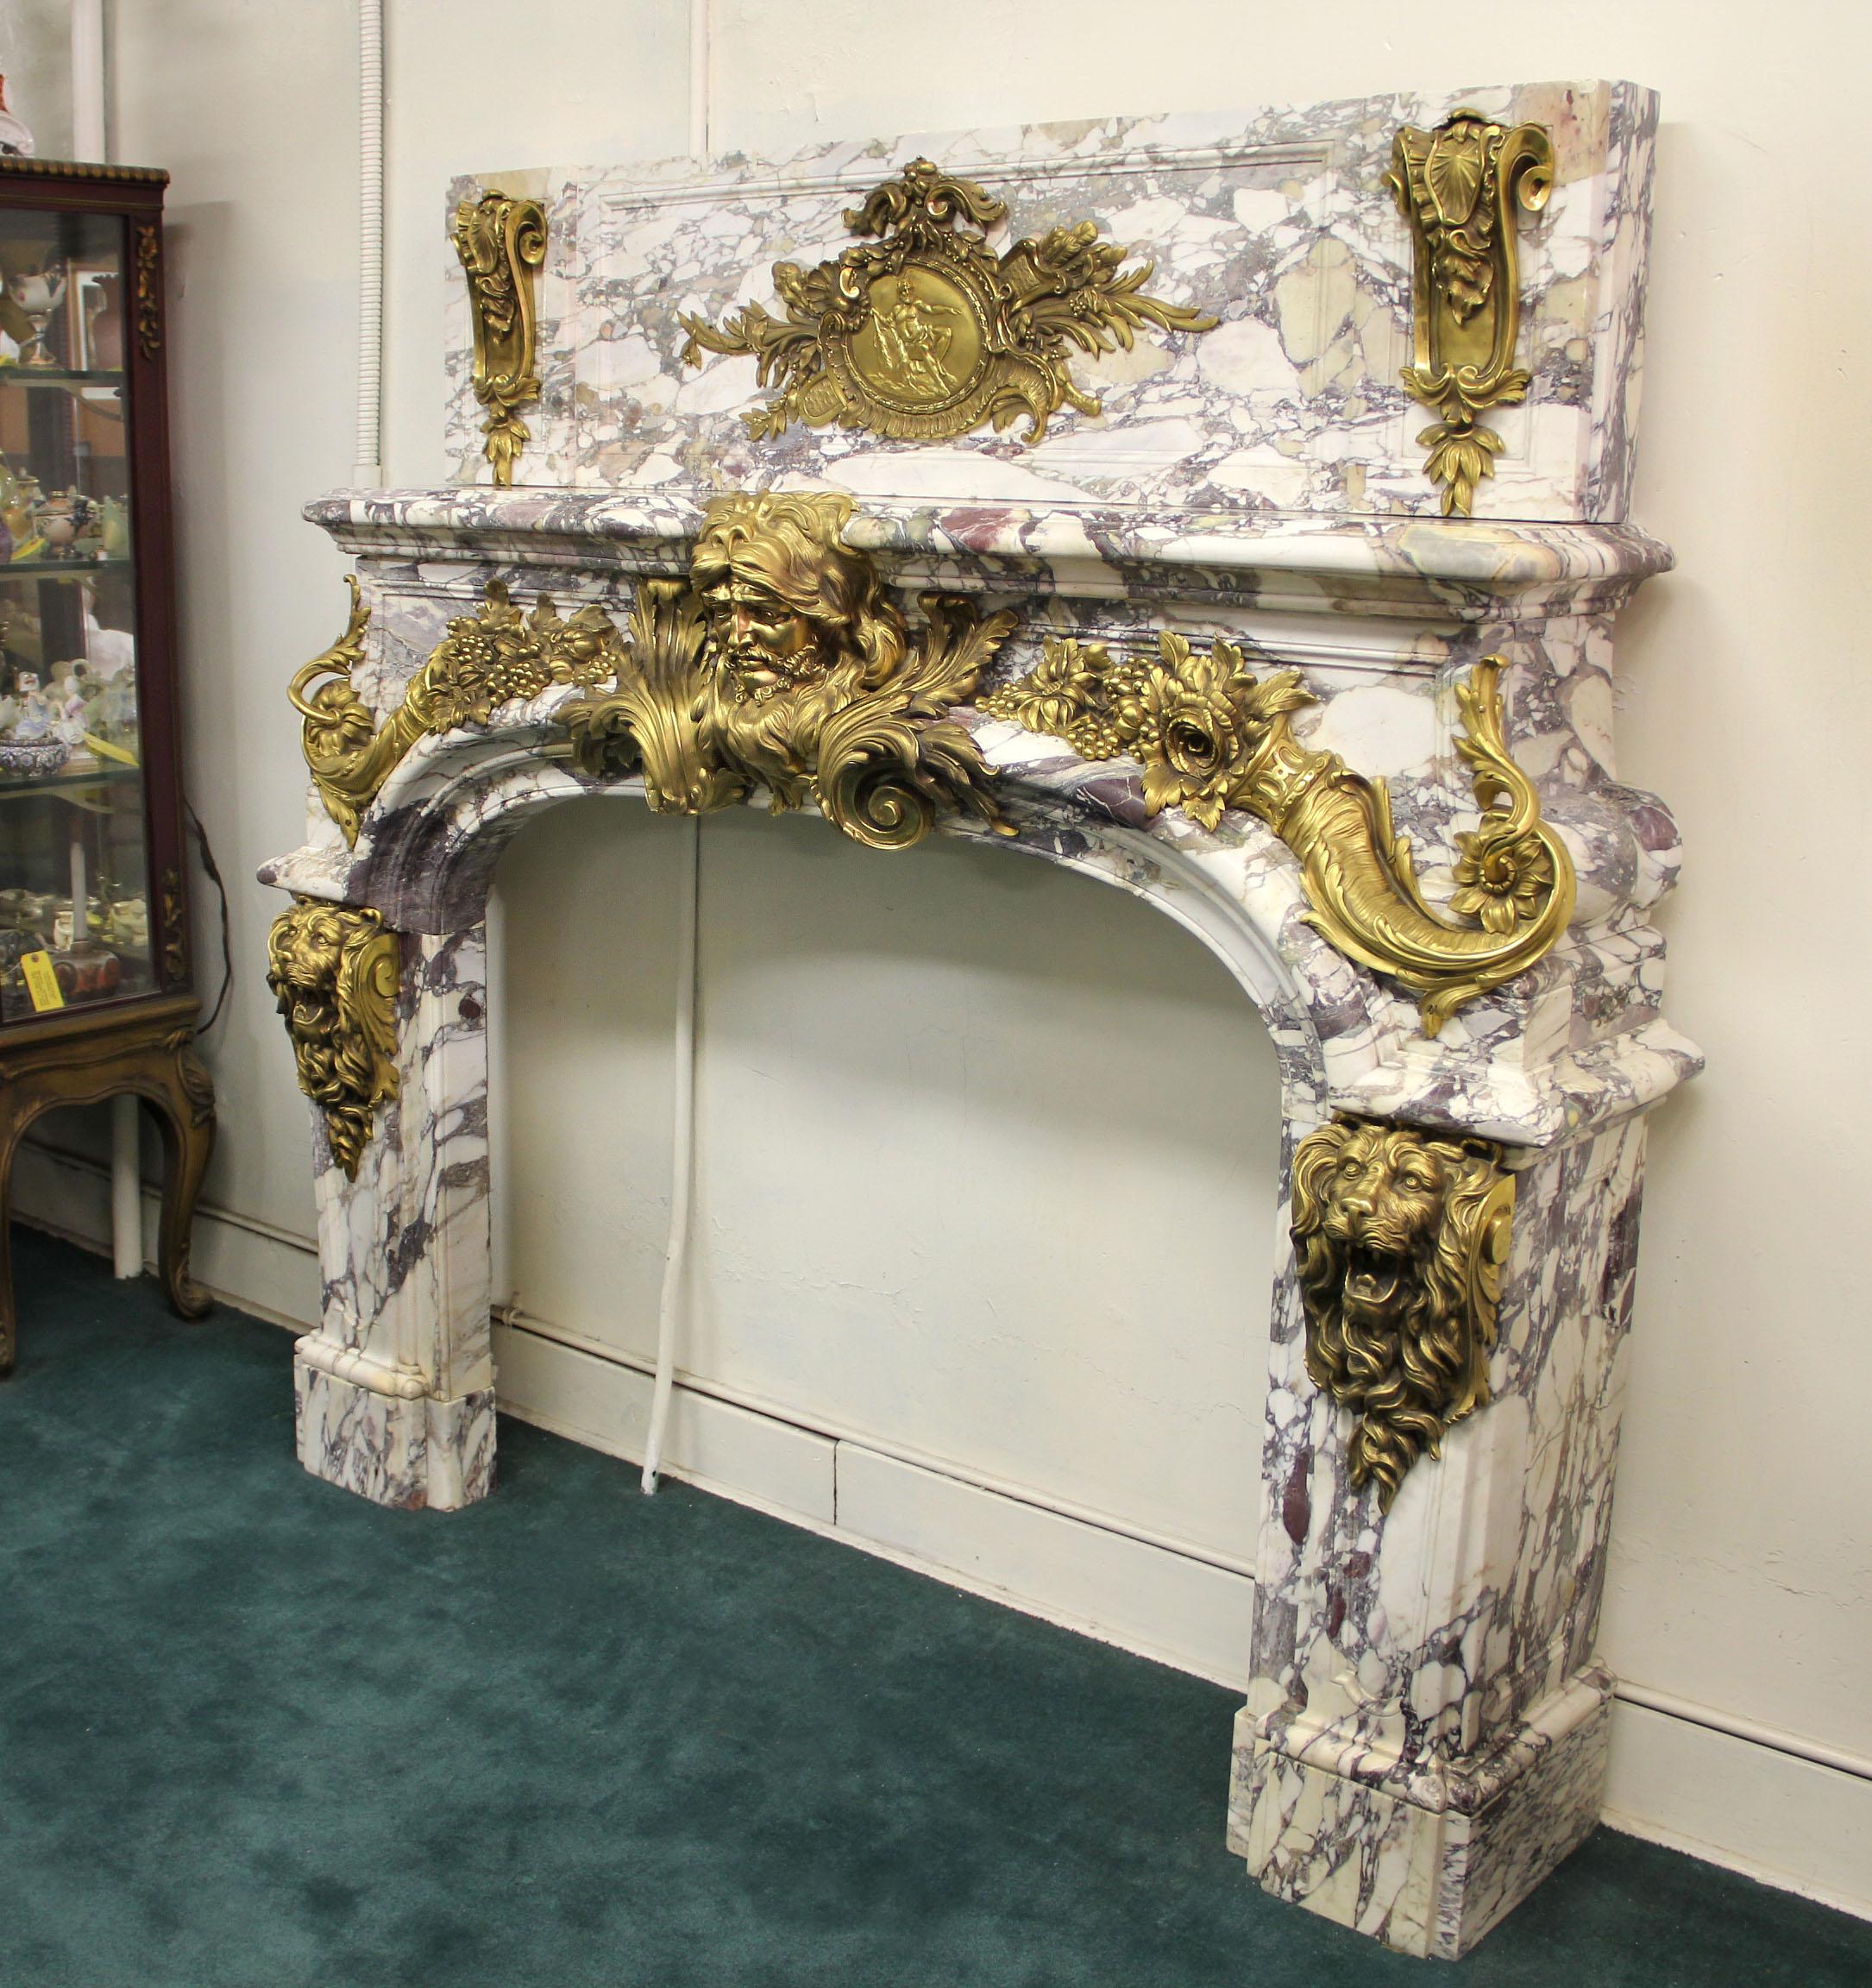 Very important late 19th century gilt bronze mounted palatial fireplace surround.

This fireplace is an exact copy of the original 18th century model that was made for The Salon de Hercules in The Palace of Versailles. After Antoine Vassé.